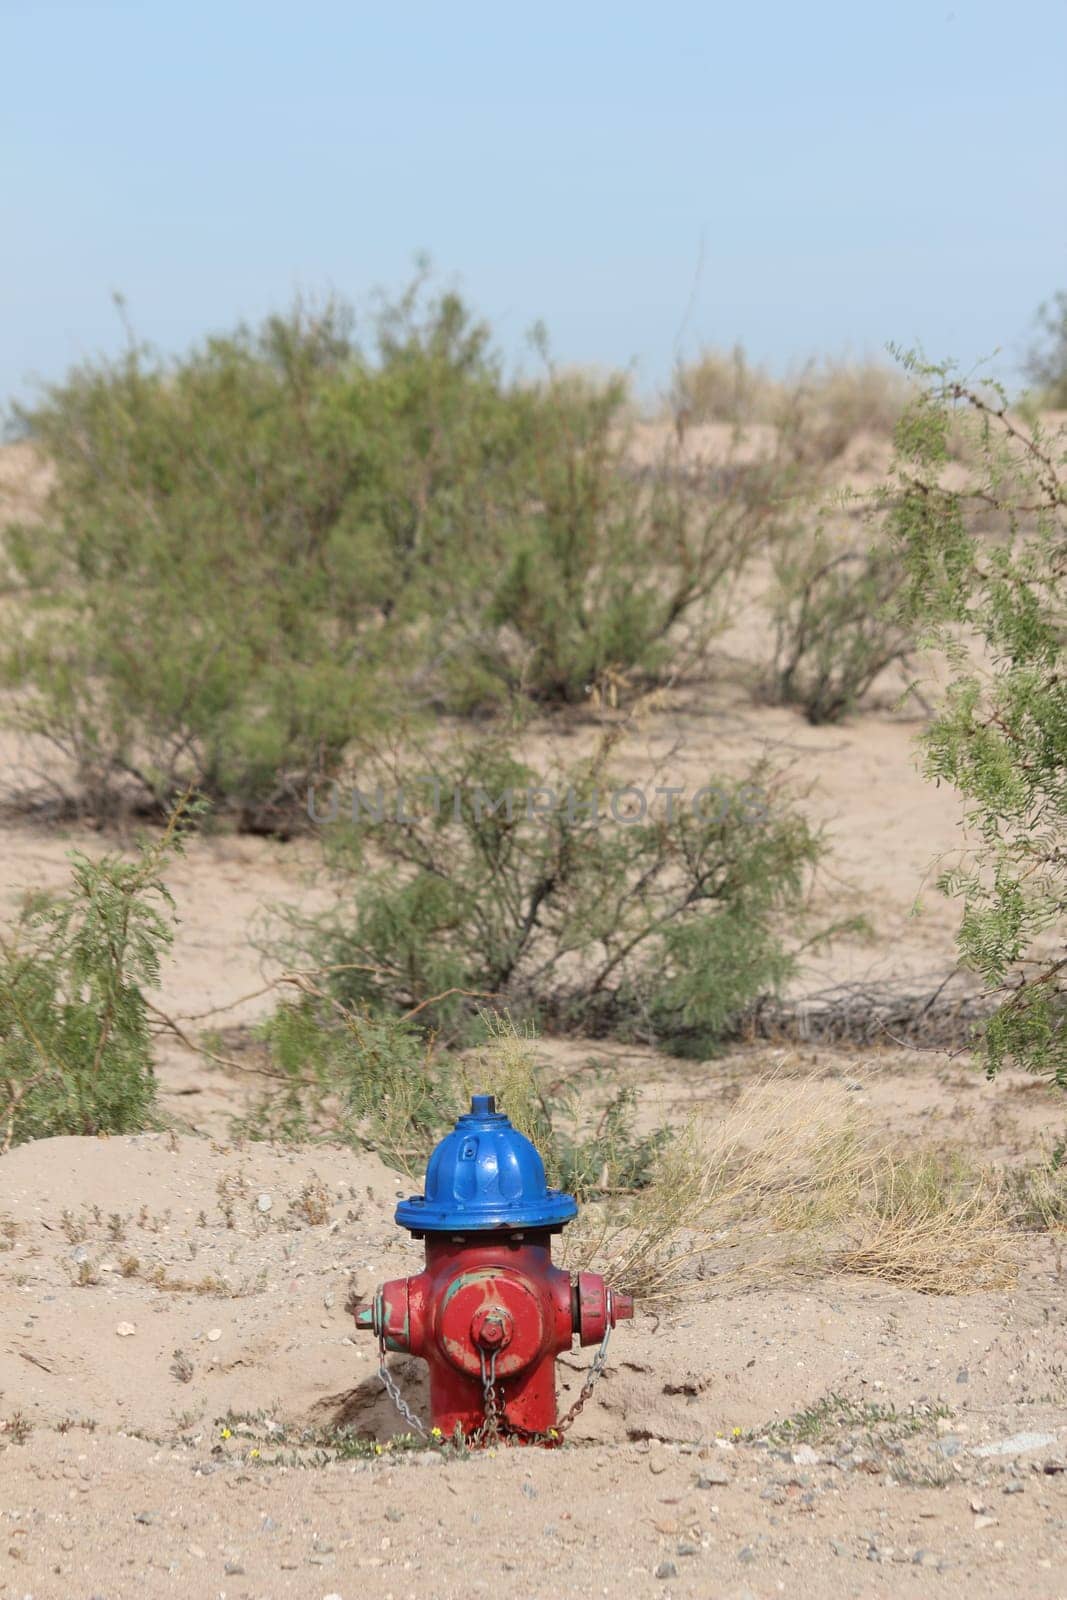 Red and blue fire hydrant in a desert landscape environment by Marcielito